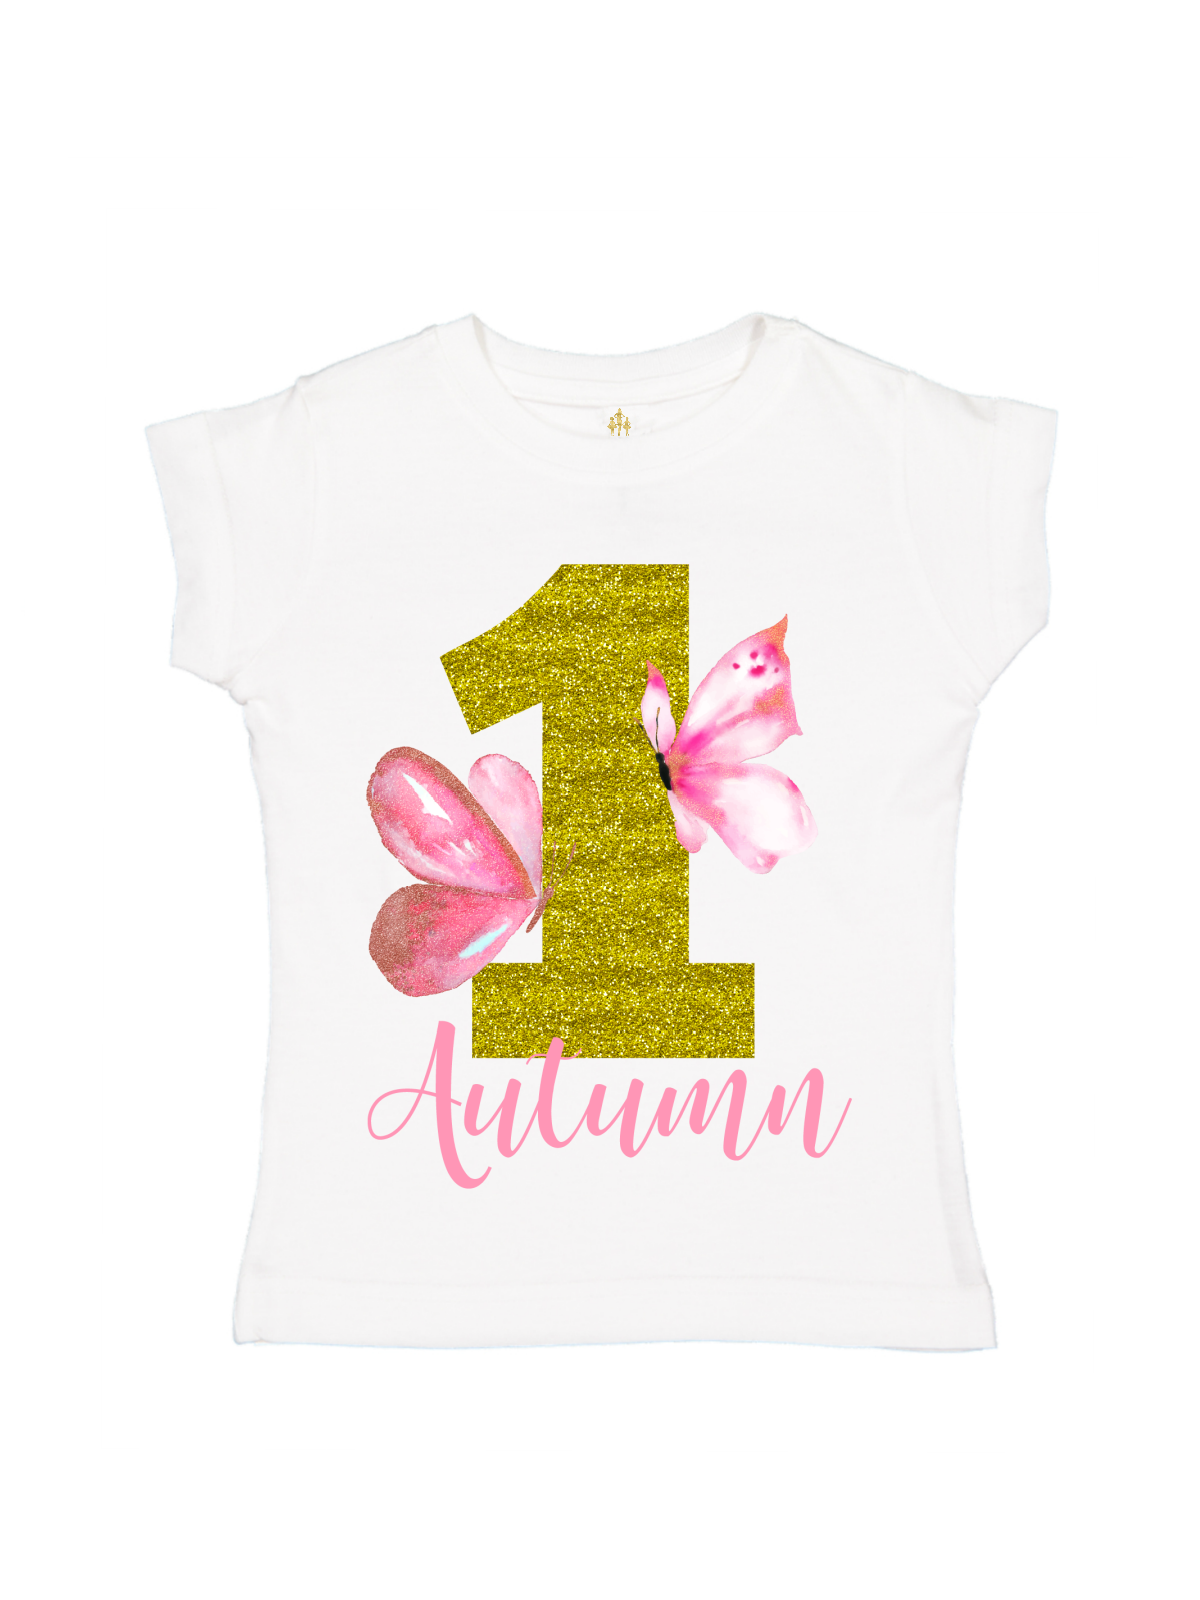 Pink & Gold Butterflies Girls Tutu Outfit - Personalized